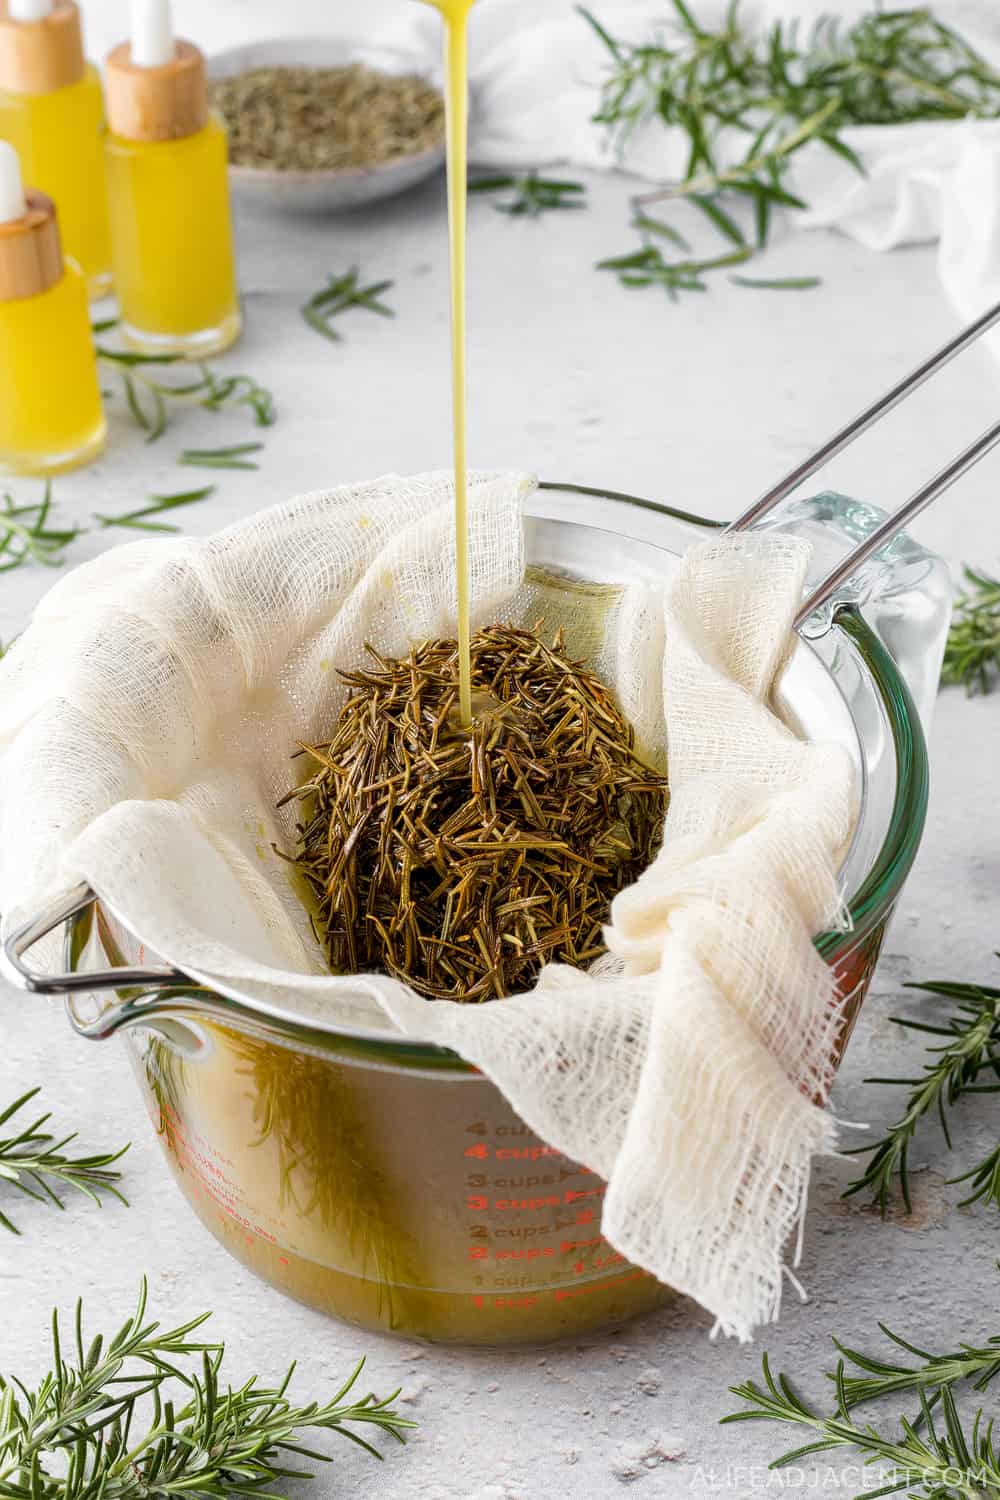 How to make rosemary oil for hair growth – straining rosemary leaves from infused oil.